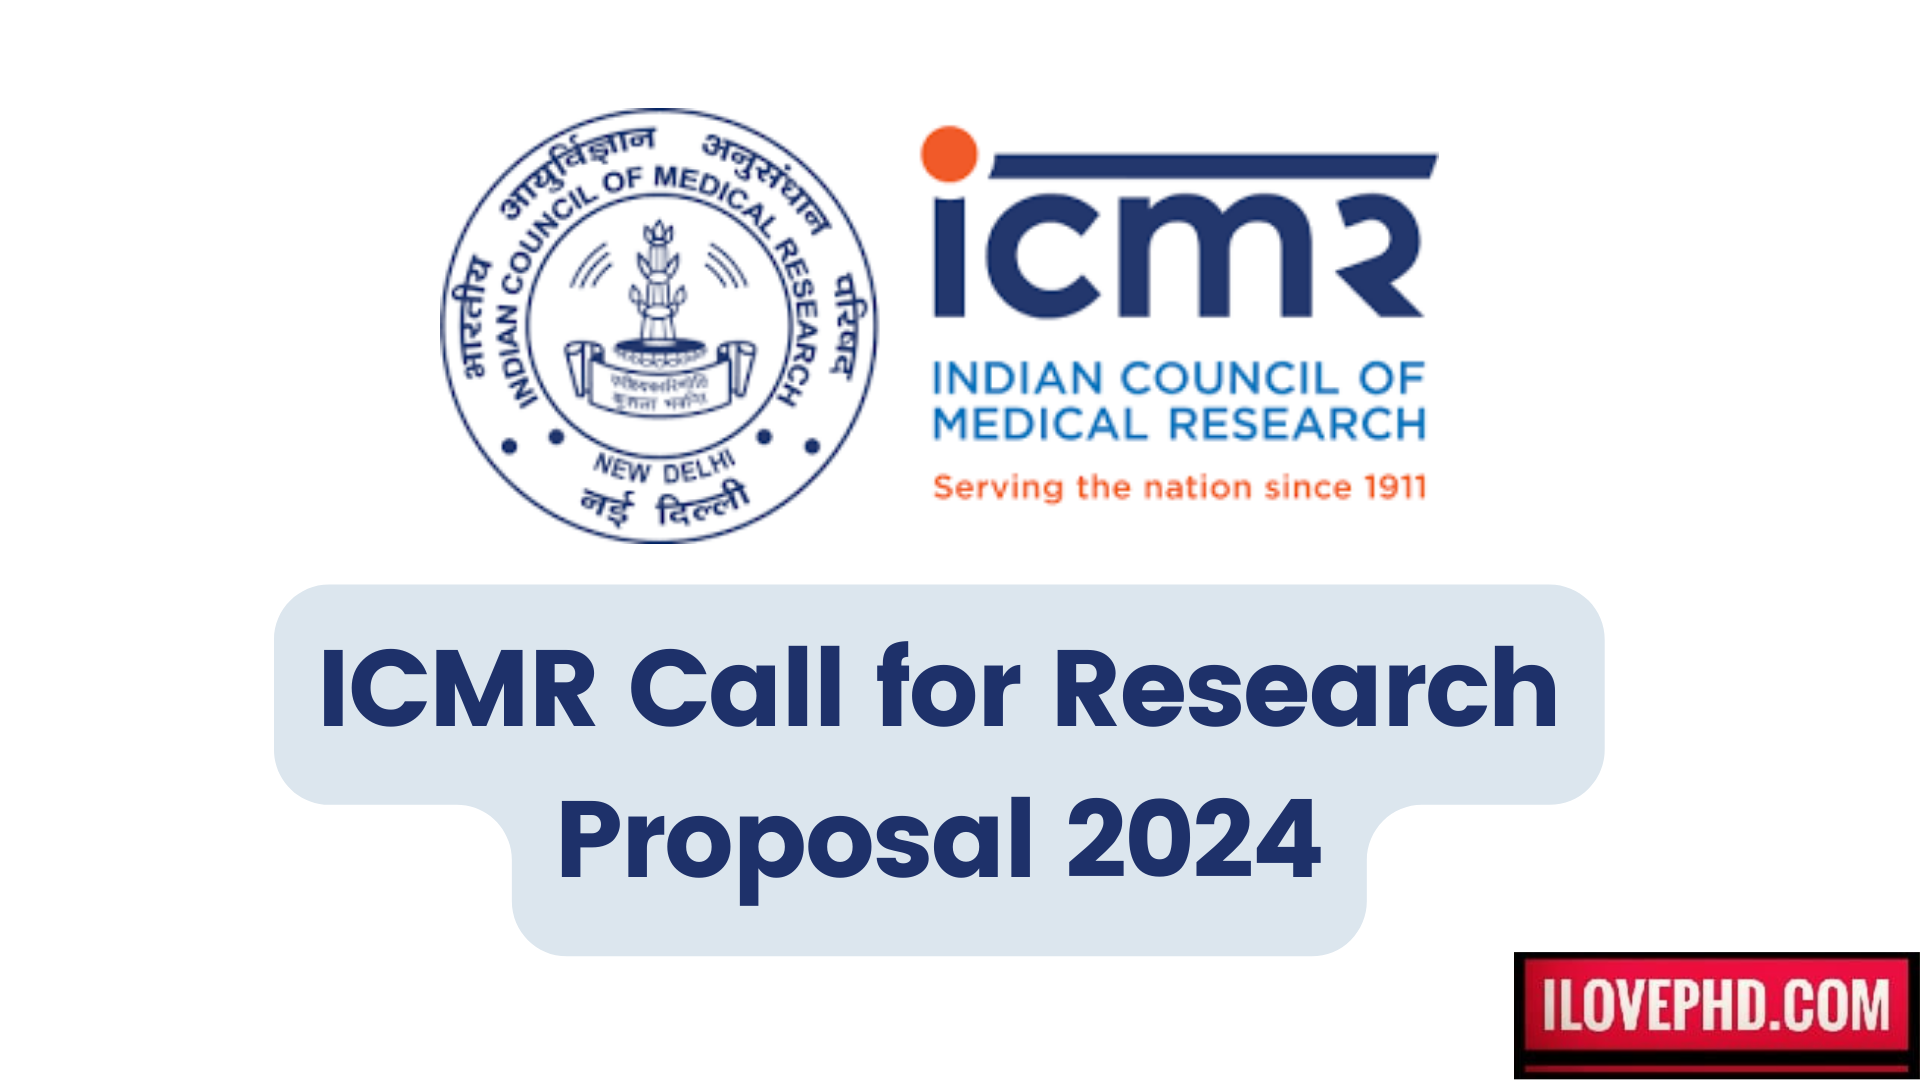 ICMR Call for Research Proposal 2024 iLovePhD